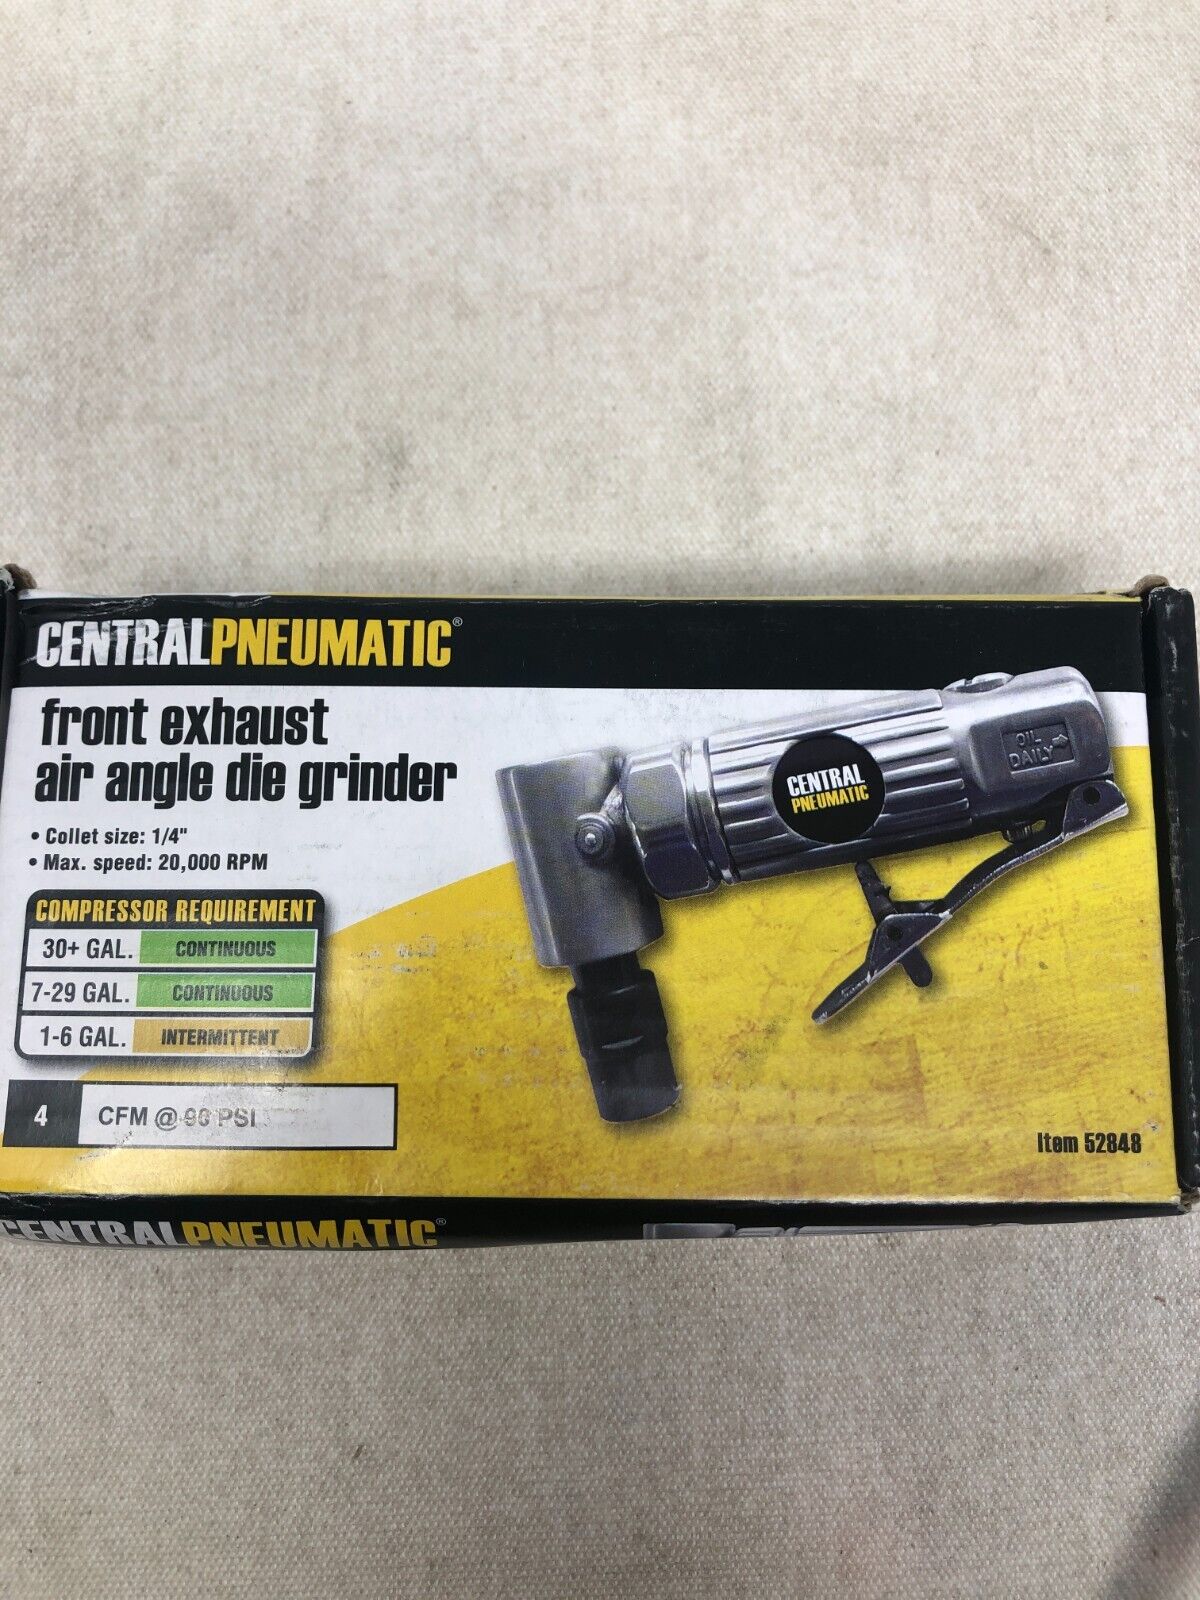 Central Pneumatic 1/4 in. Front Exhaust Right Angle Air Die Grinder #52848